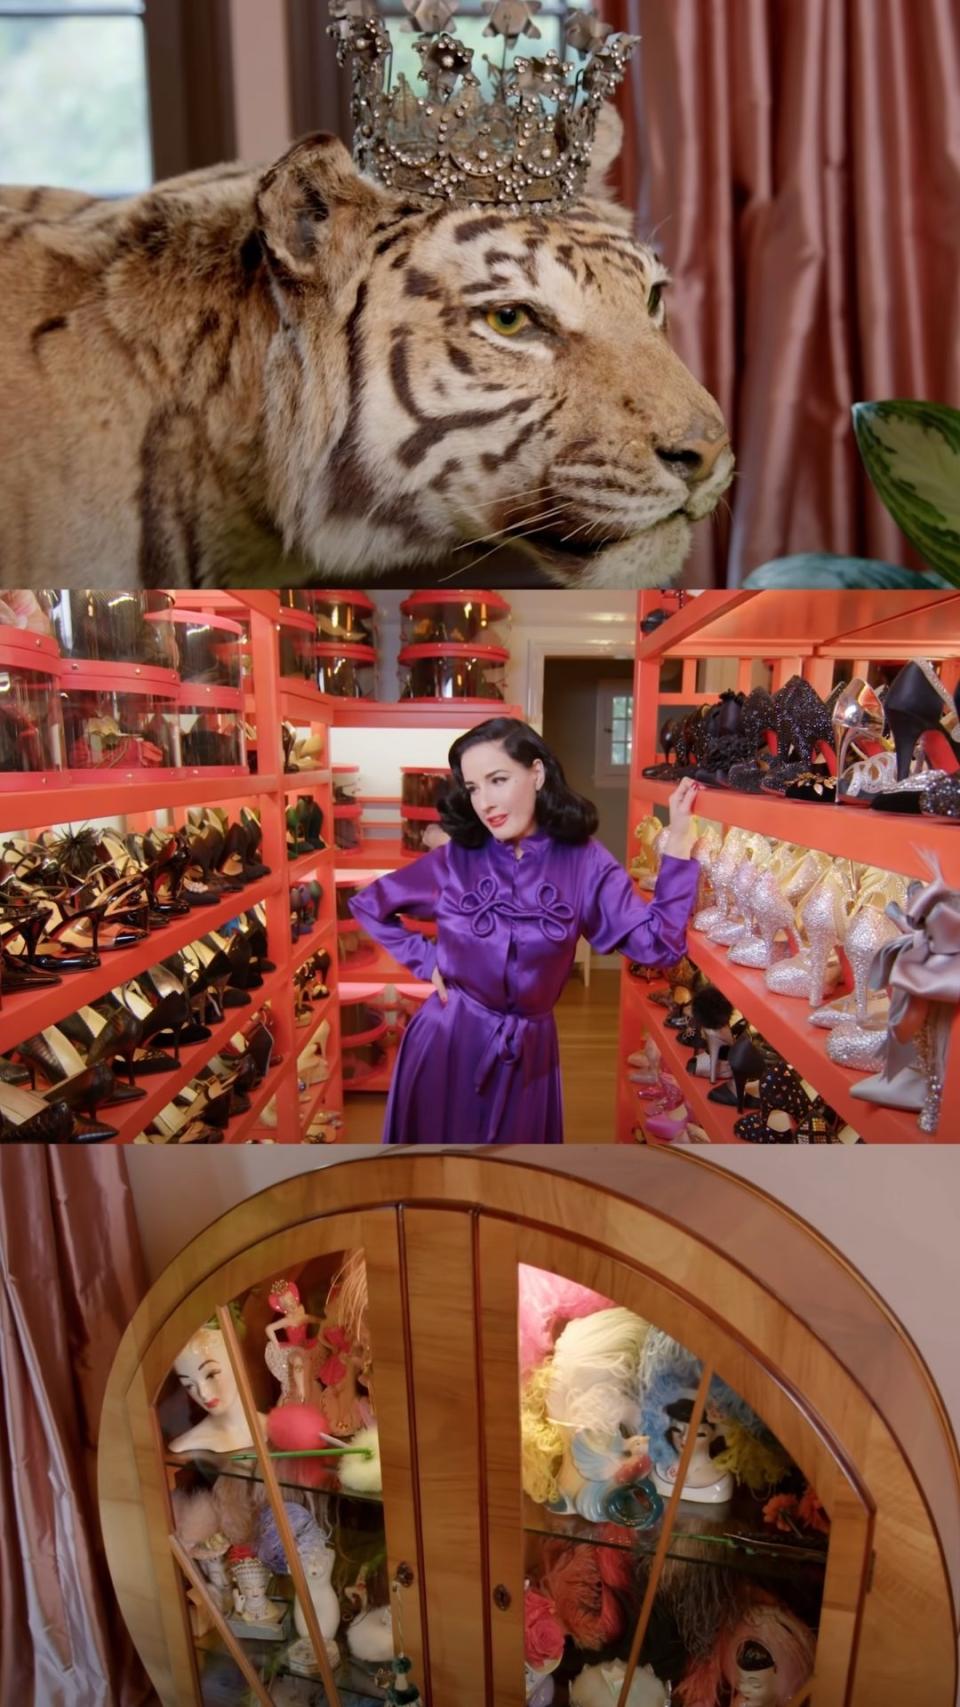 A taxidermy big cat, Dita in her shoe room, and a feather collection